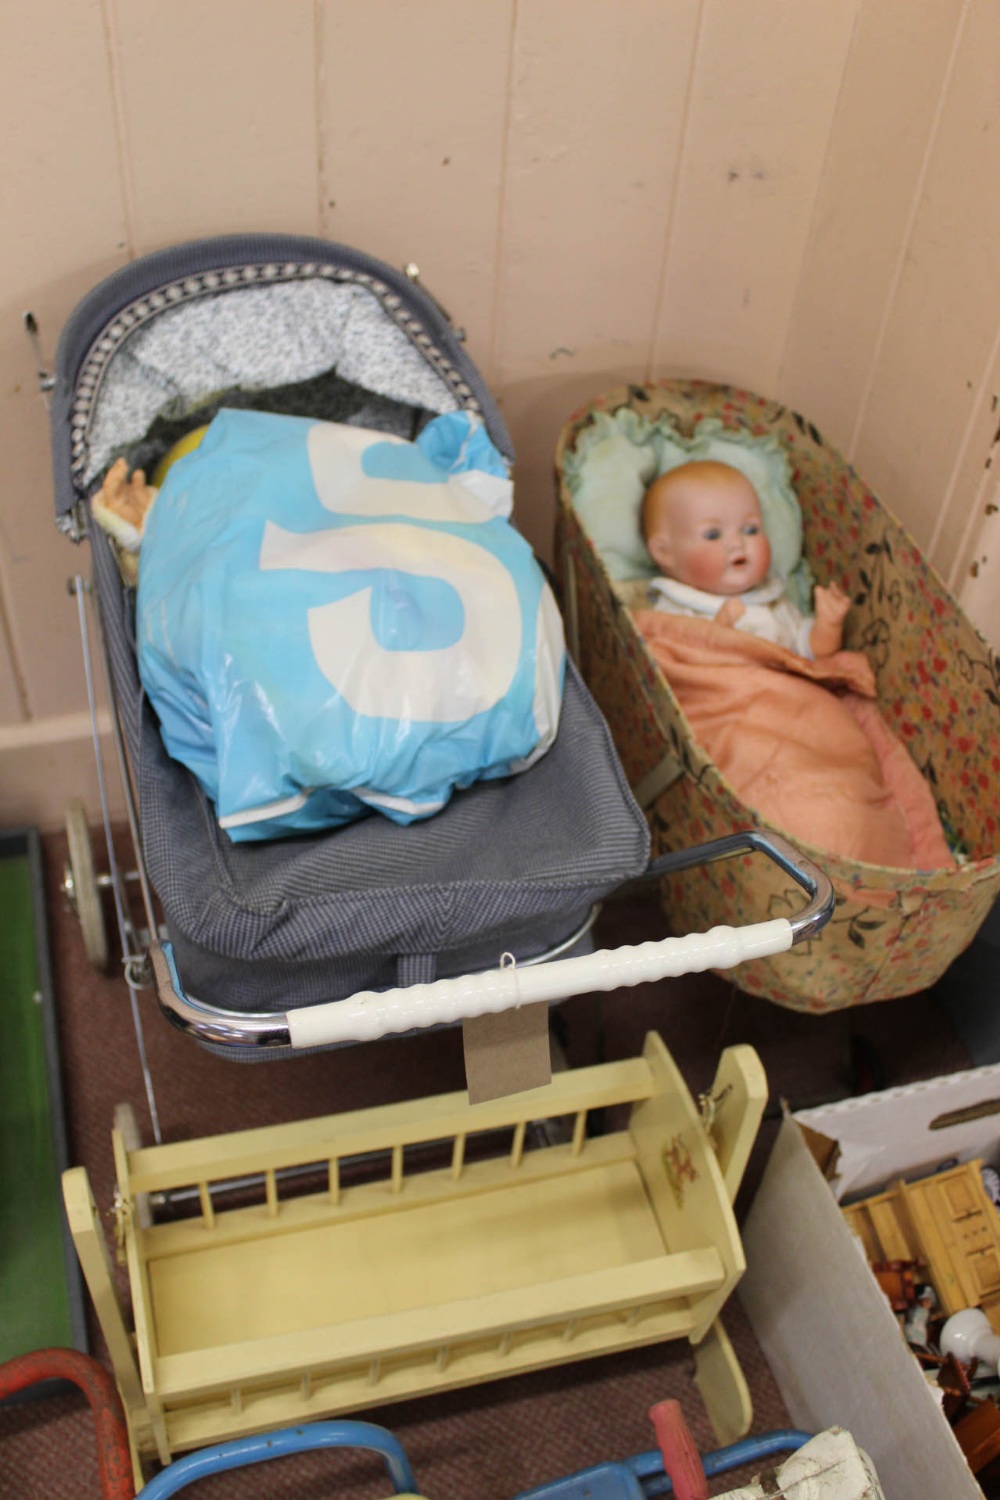 A 'classic' dolls pram and vinyl doll plus clothes and a wooden cradle